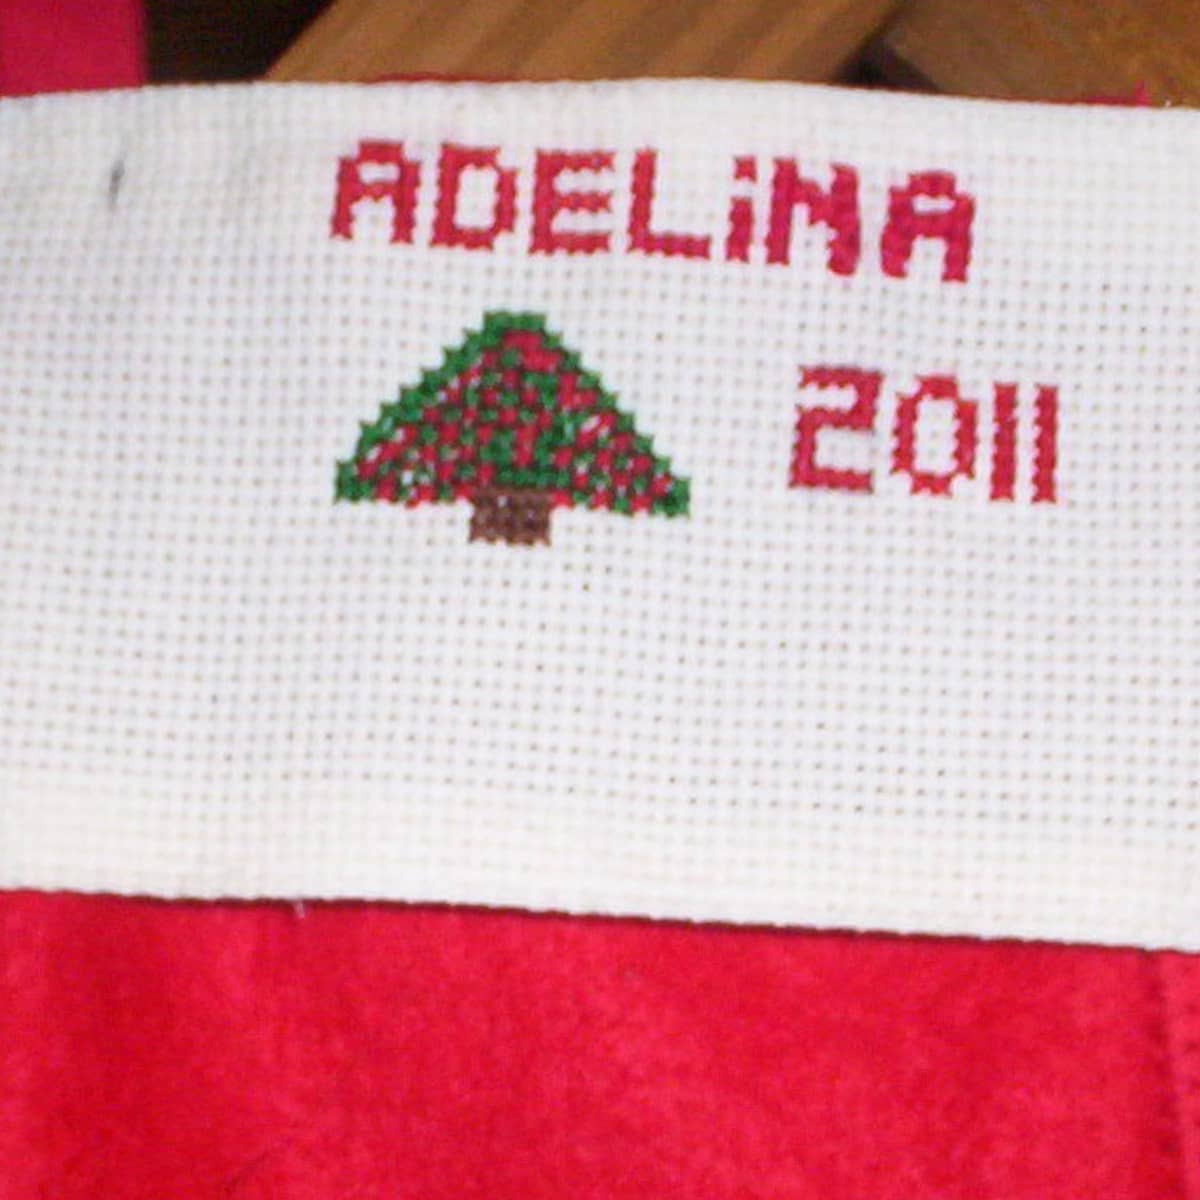 Make A Christmas Stocking With A Counted Cross Stitch Name On The